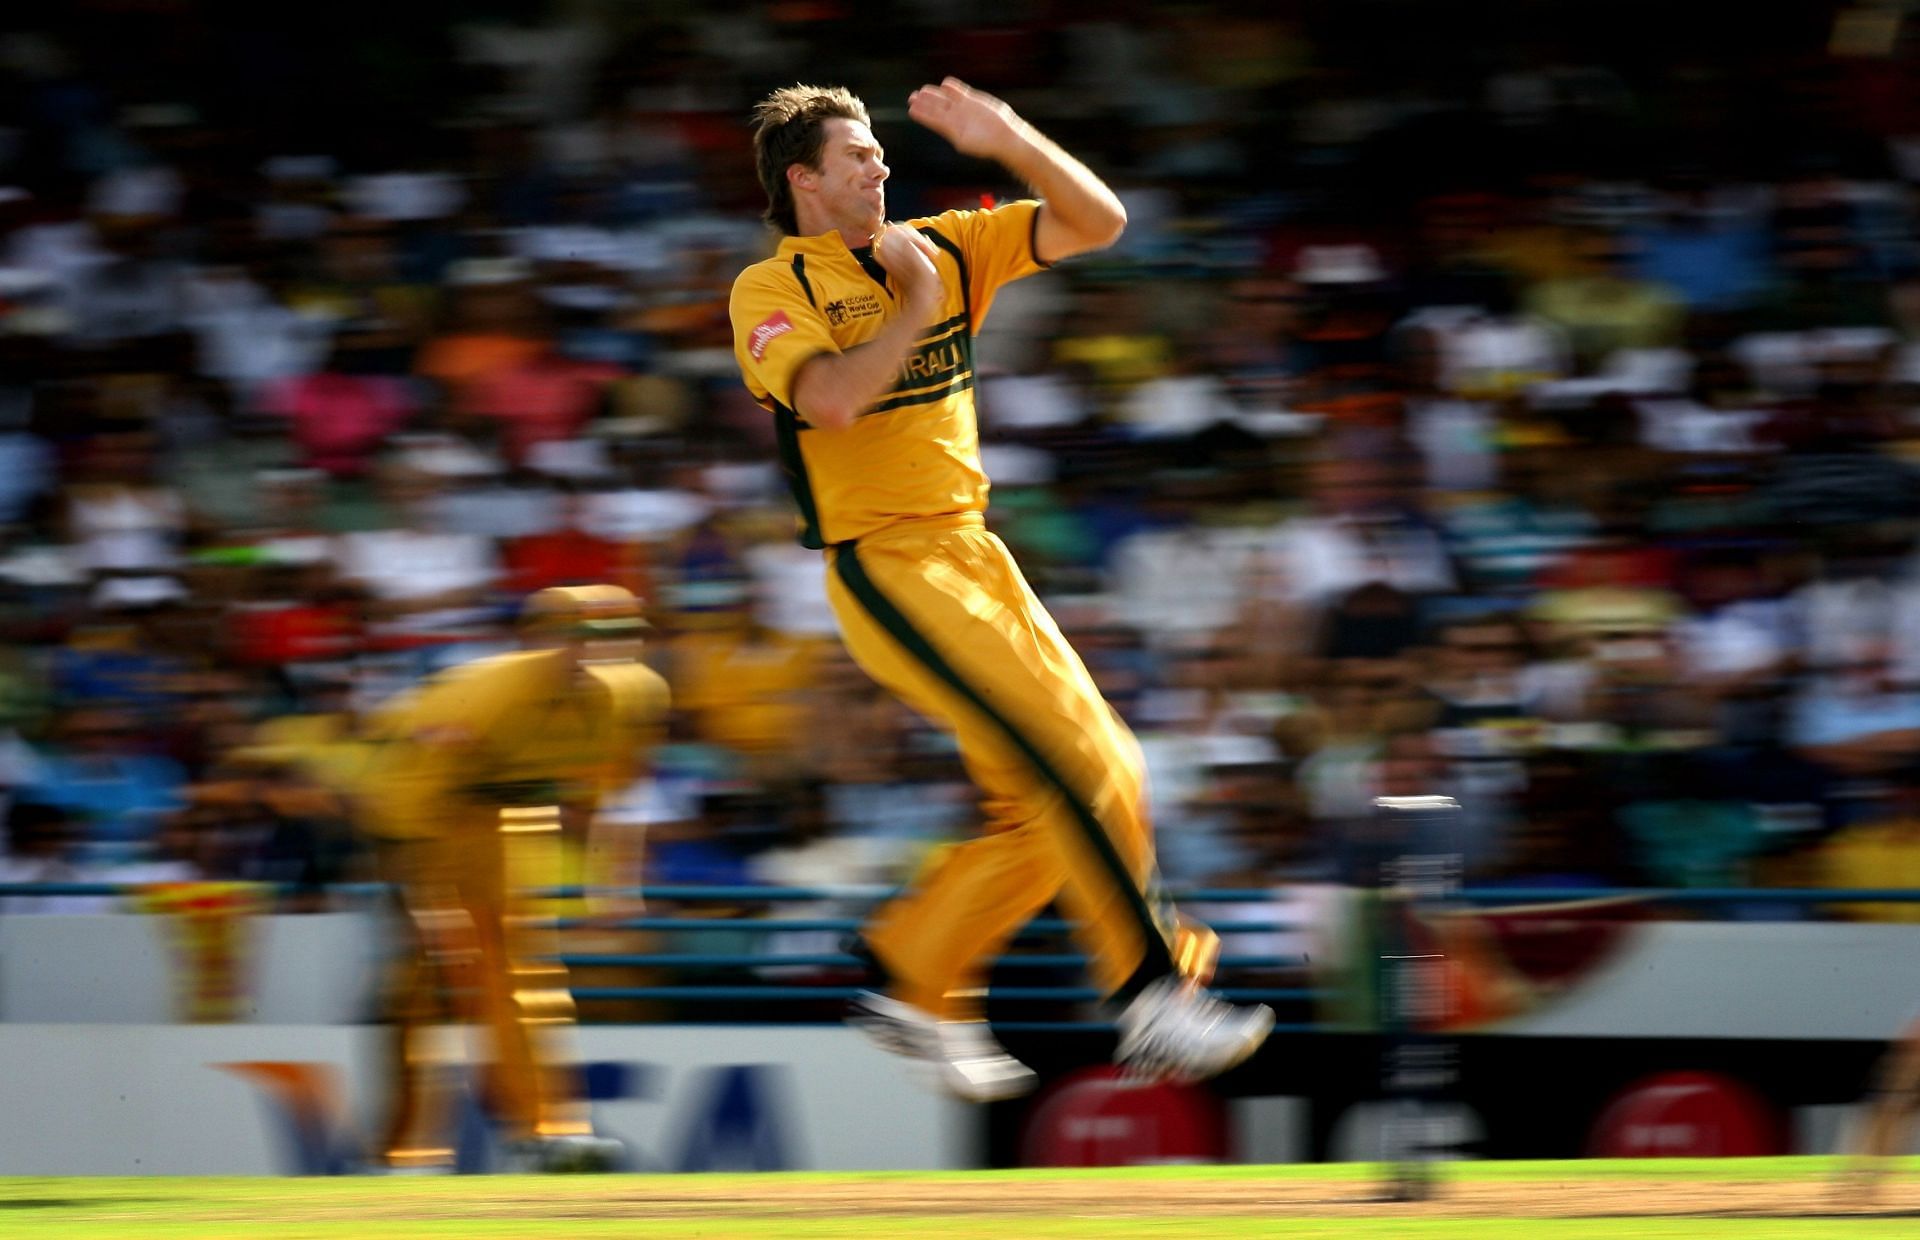 Glenn McGrath was the highest wicket-taker in the 2007 World Cup